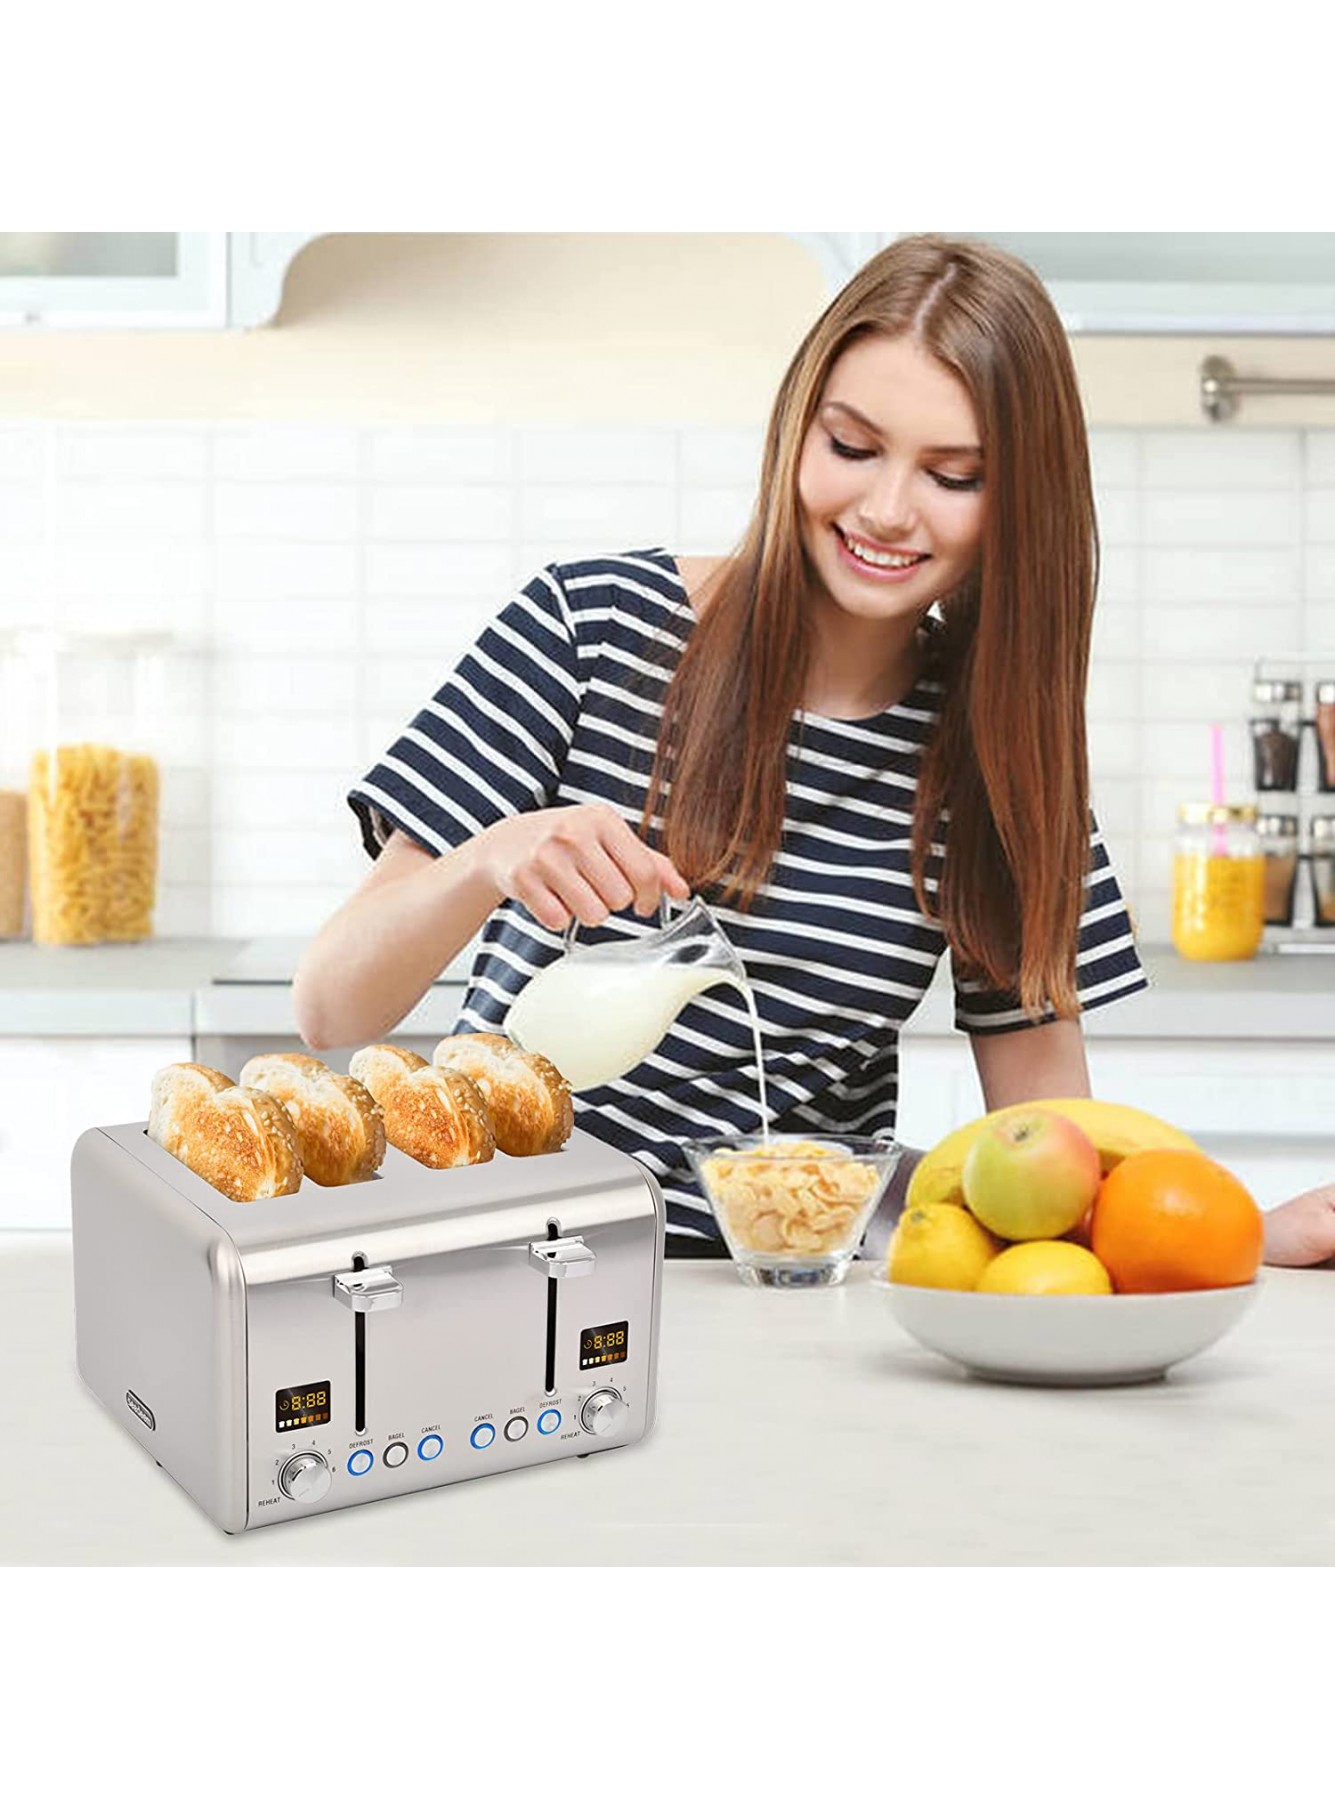 https://www.instagramscraperapi.com/image/cache/data/category_48/seedeem-toaster-4-slice-stainless-steel-bread-toaster-with-2-colorful-lcd-display-7--18894-1335x1800.jpg